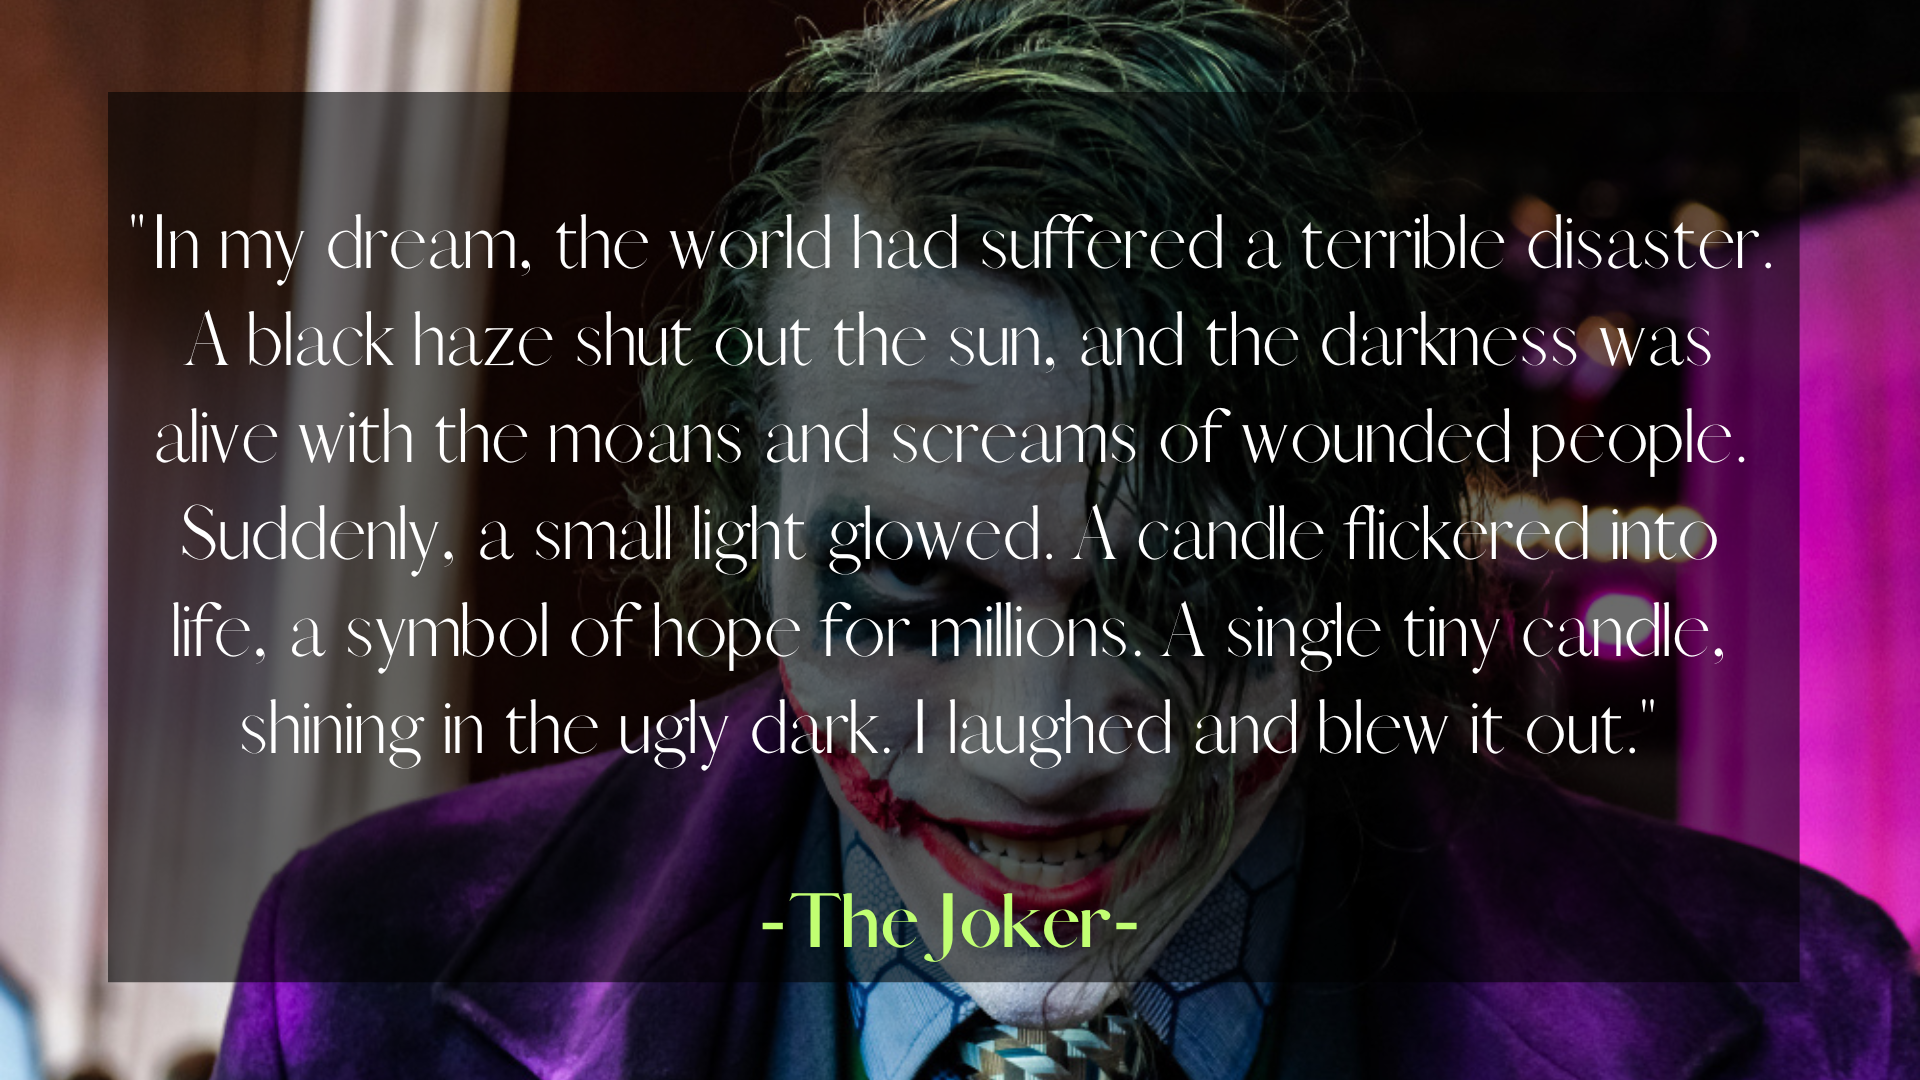 The Joker disaster quote with text overlay